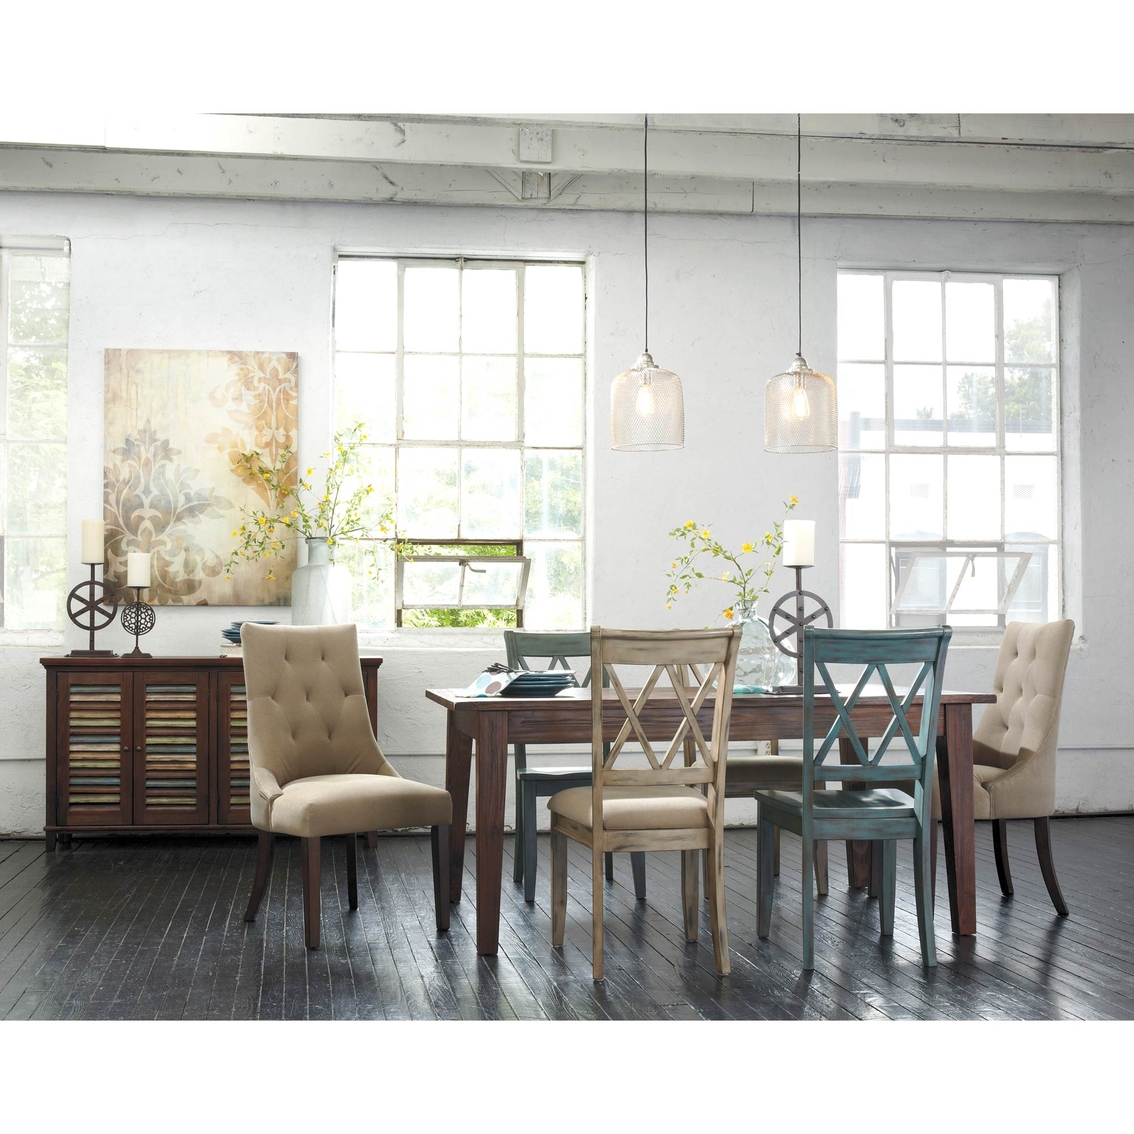 Signature Design by Ashley Mestler Rectangle Dining Table - Image 2 of 2